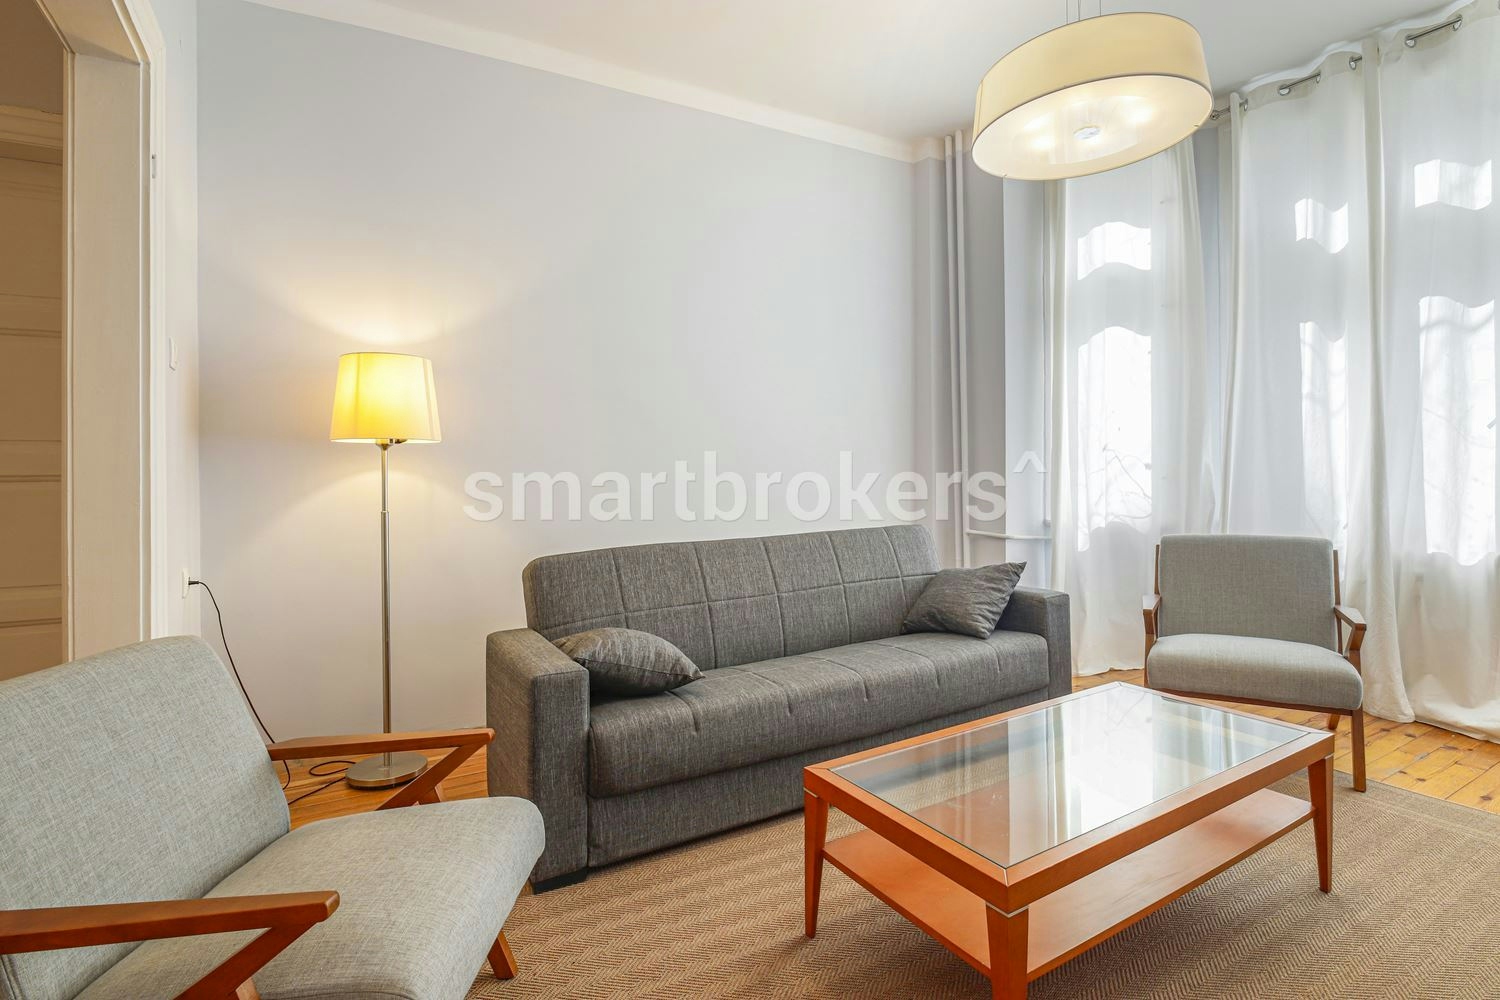 Two-bedroom apartment for rent in the center of Sofia